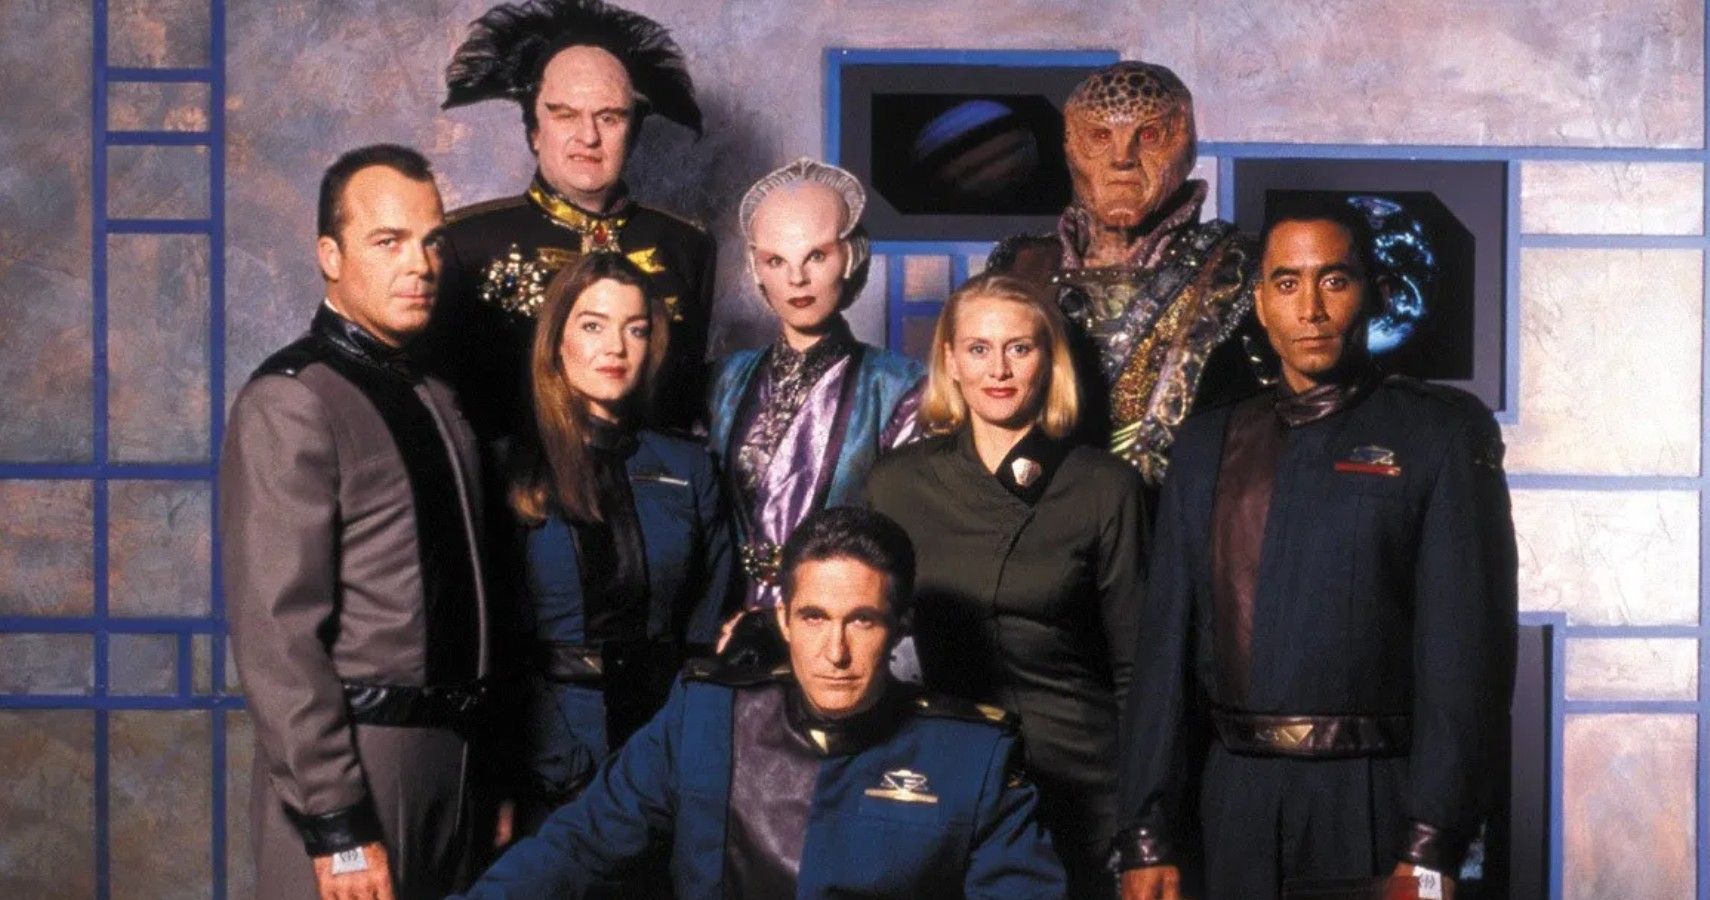 What are the MBTIs of the Babylon 5 crew